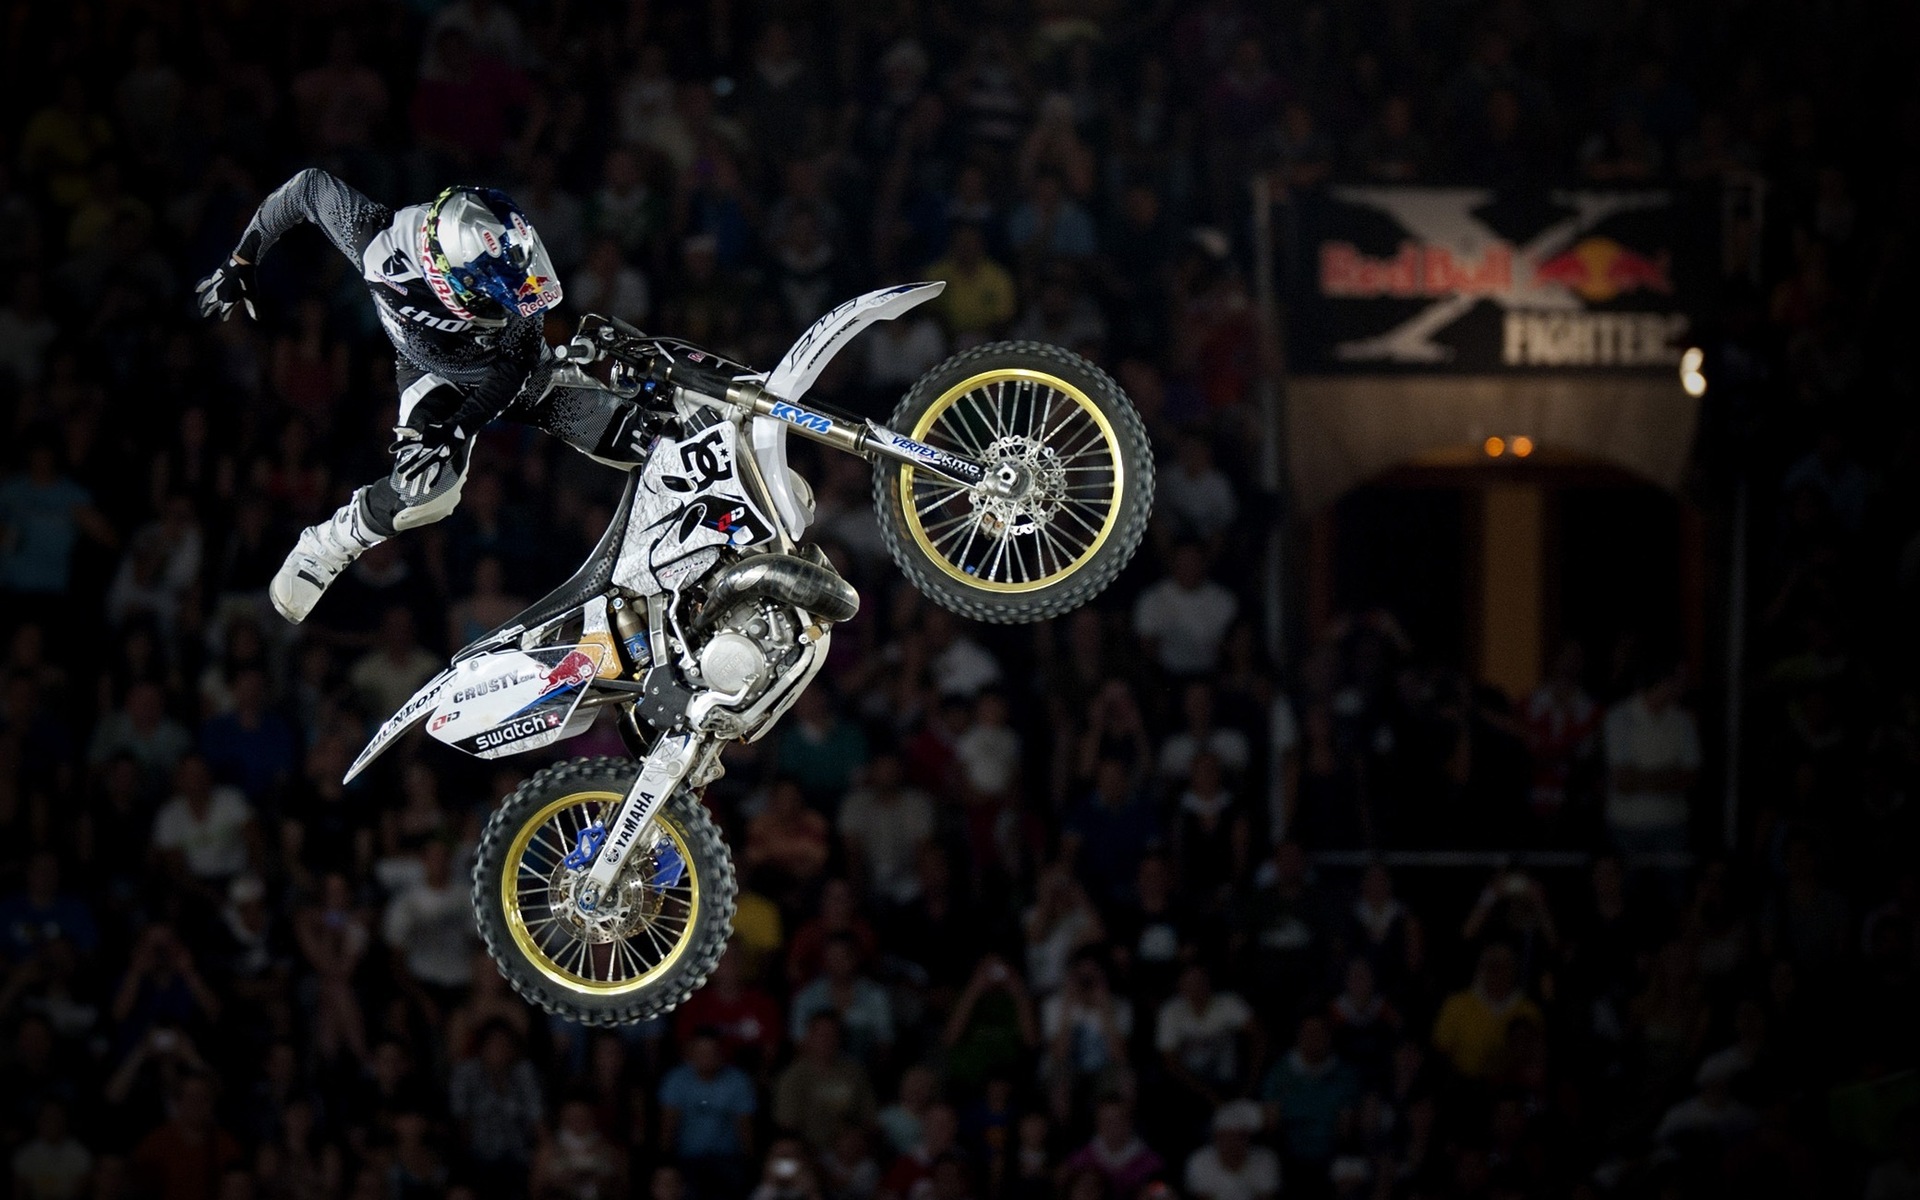 x-fighters hd wallpapers, 2011, 1920x1200, x-game